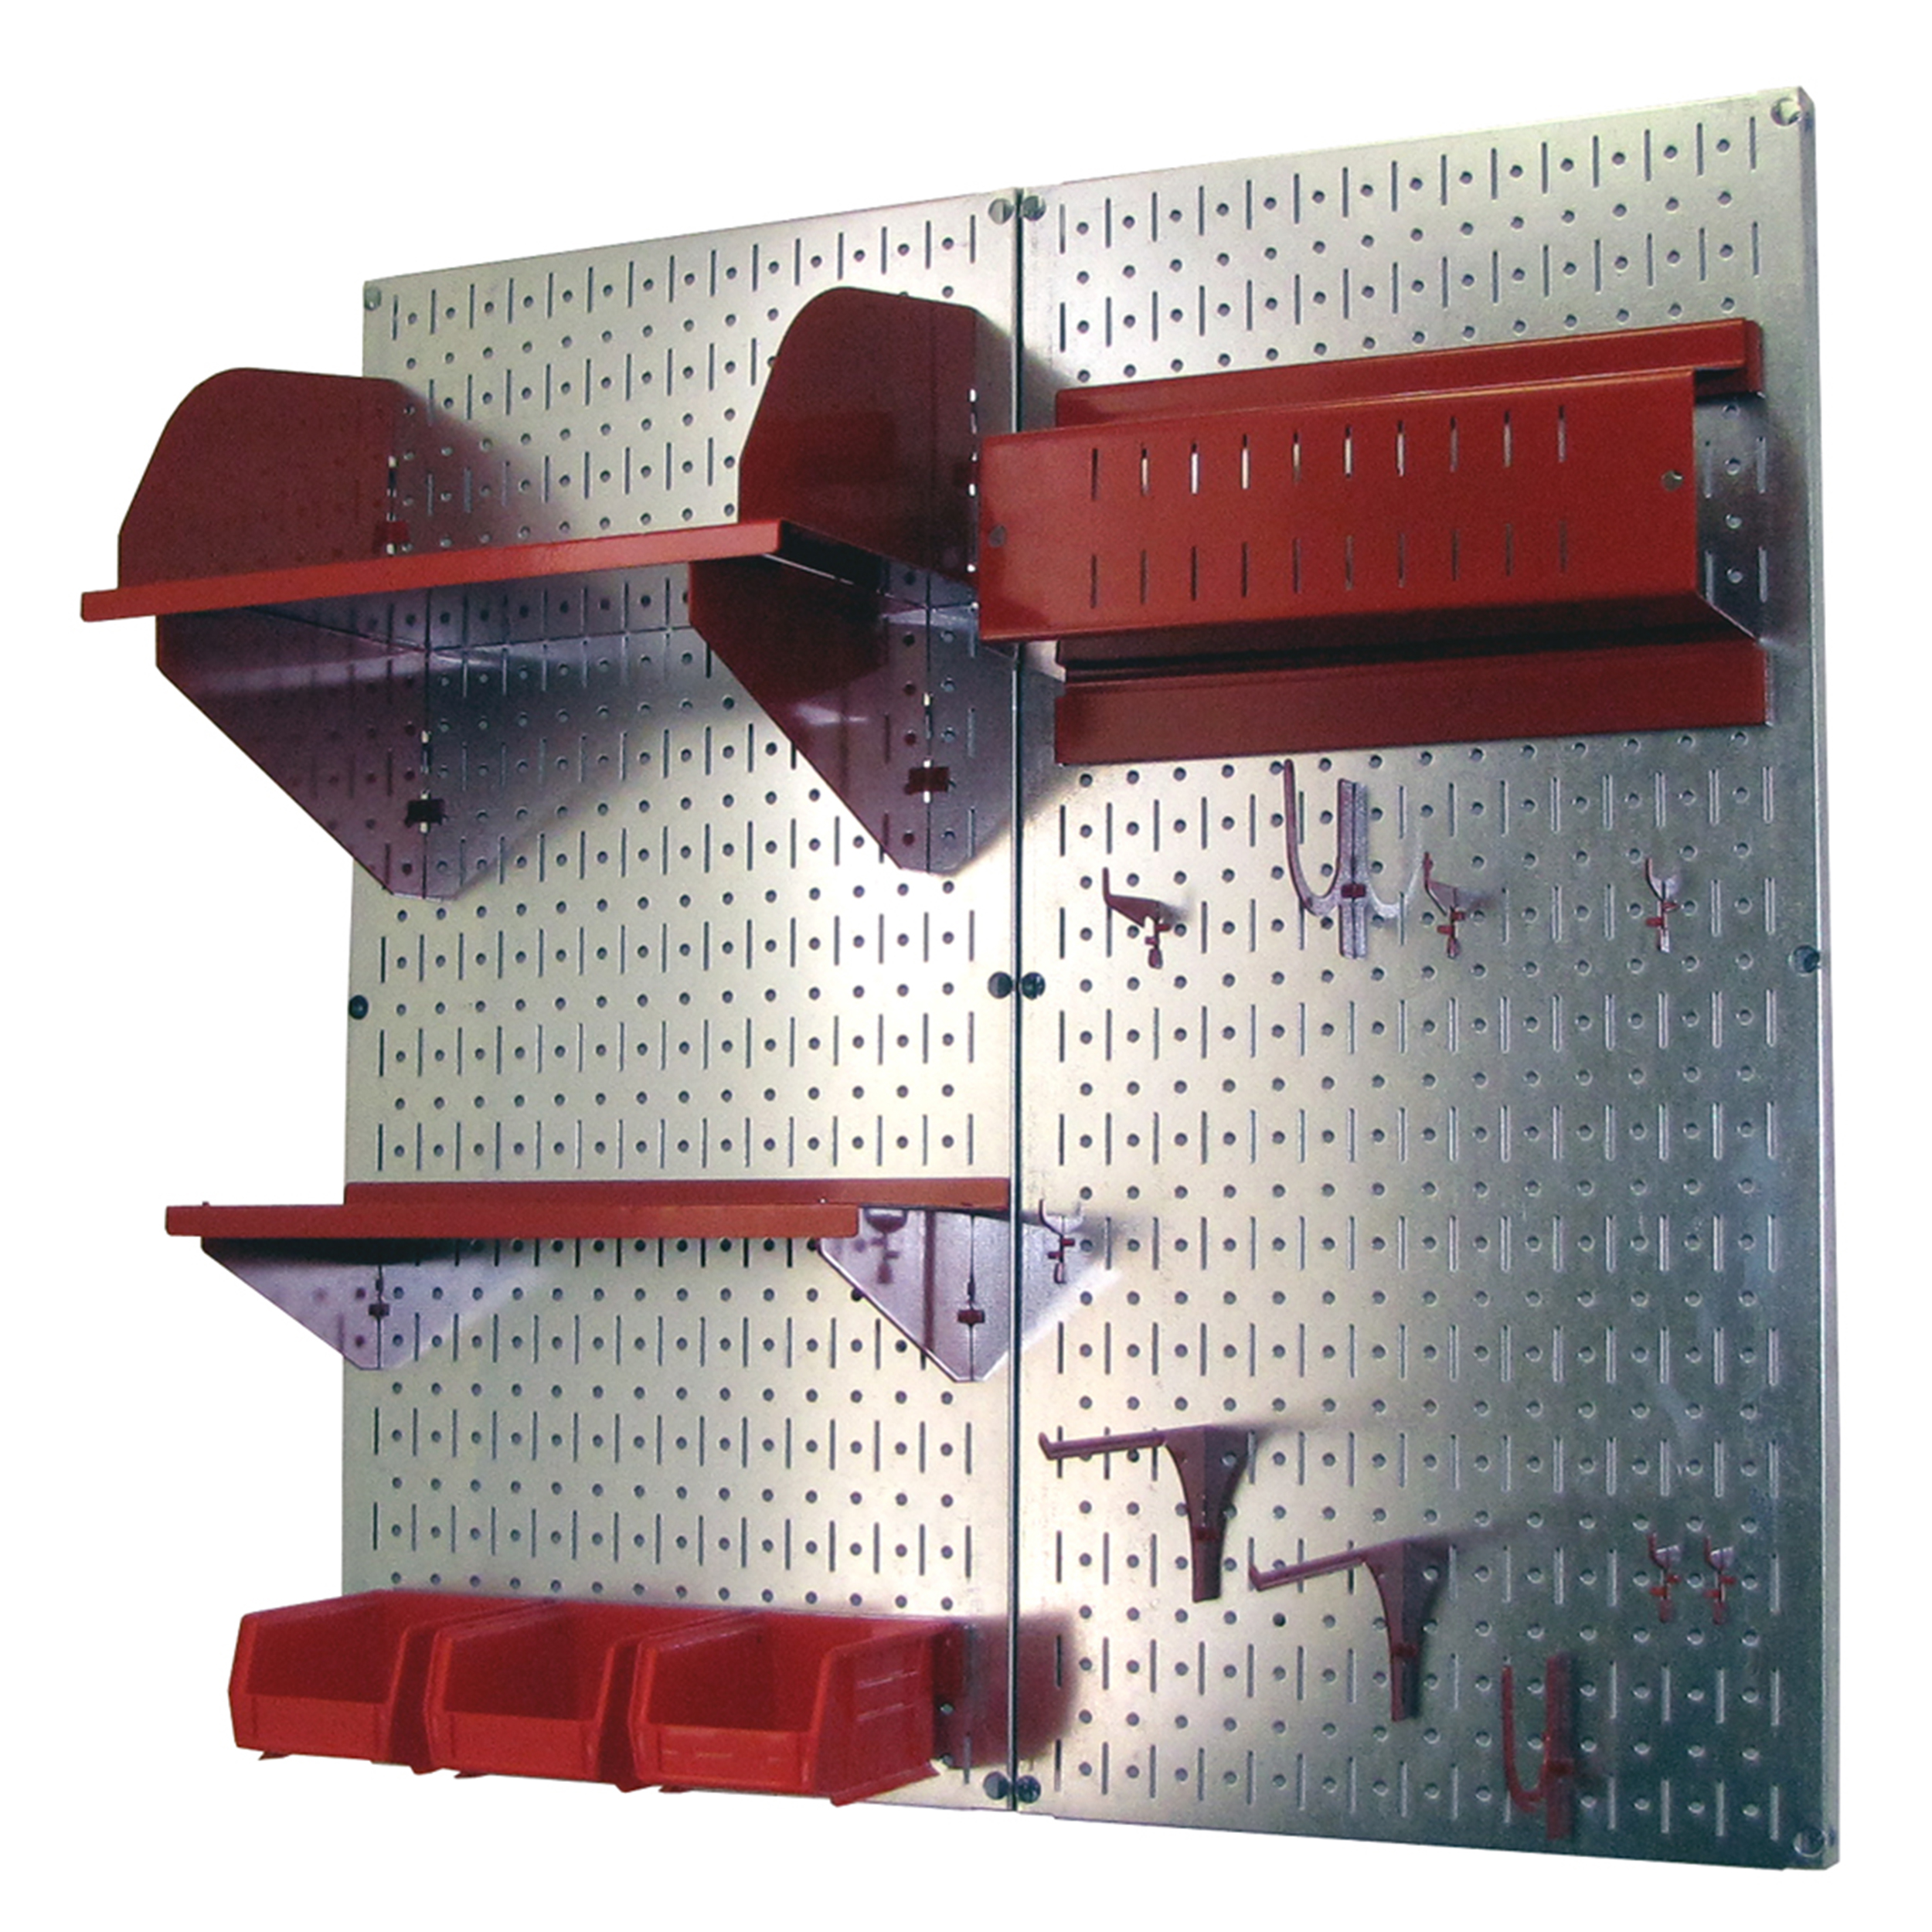 Pegboard Hobby Craft Pegboard Organizer Storage Kit With Metallic Pegboard And Red Accessories